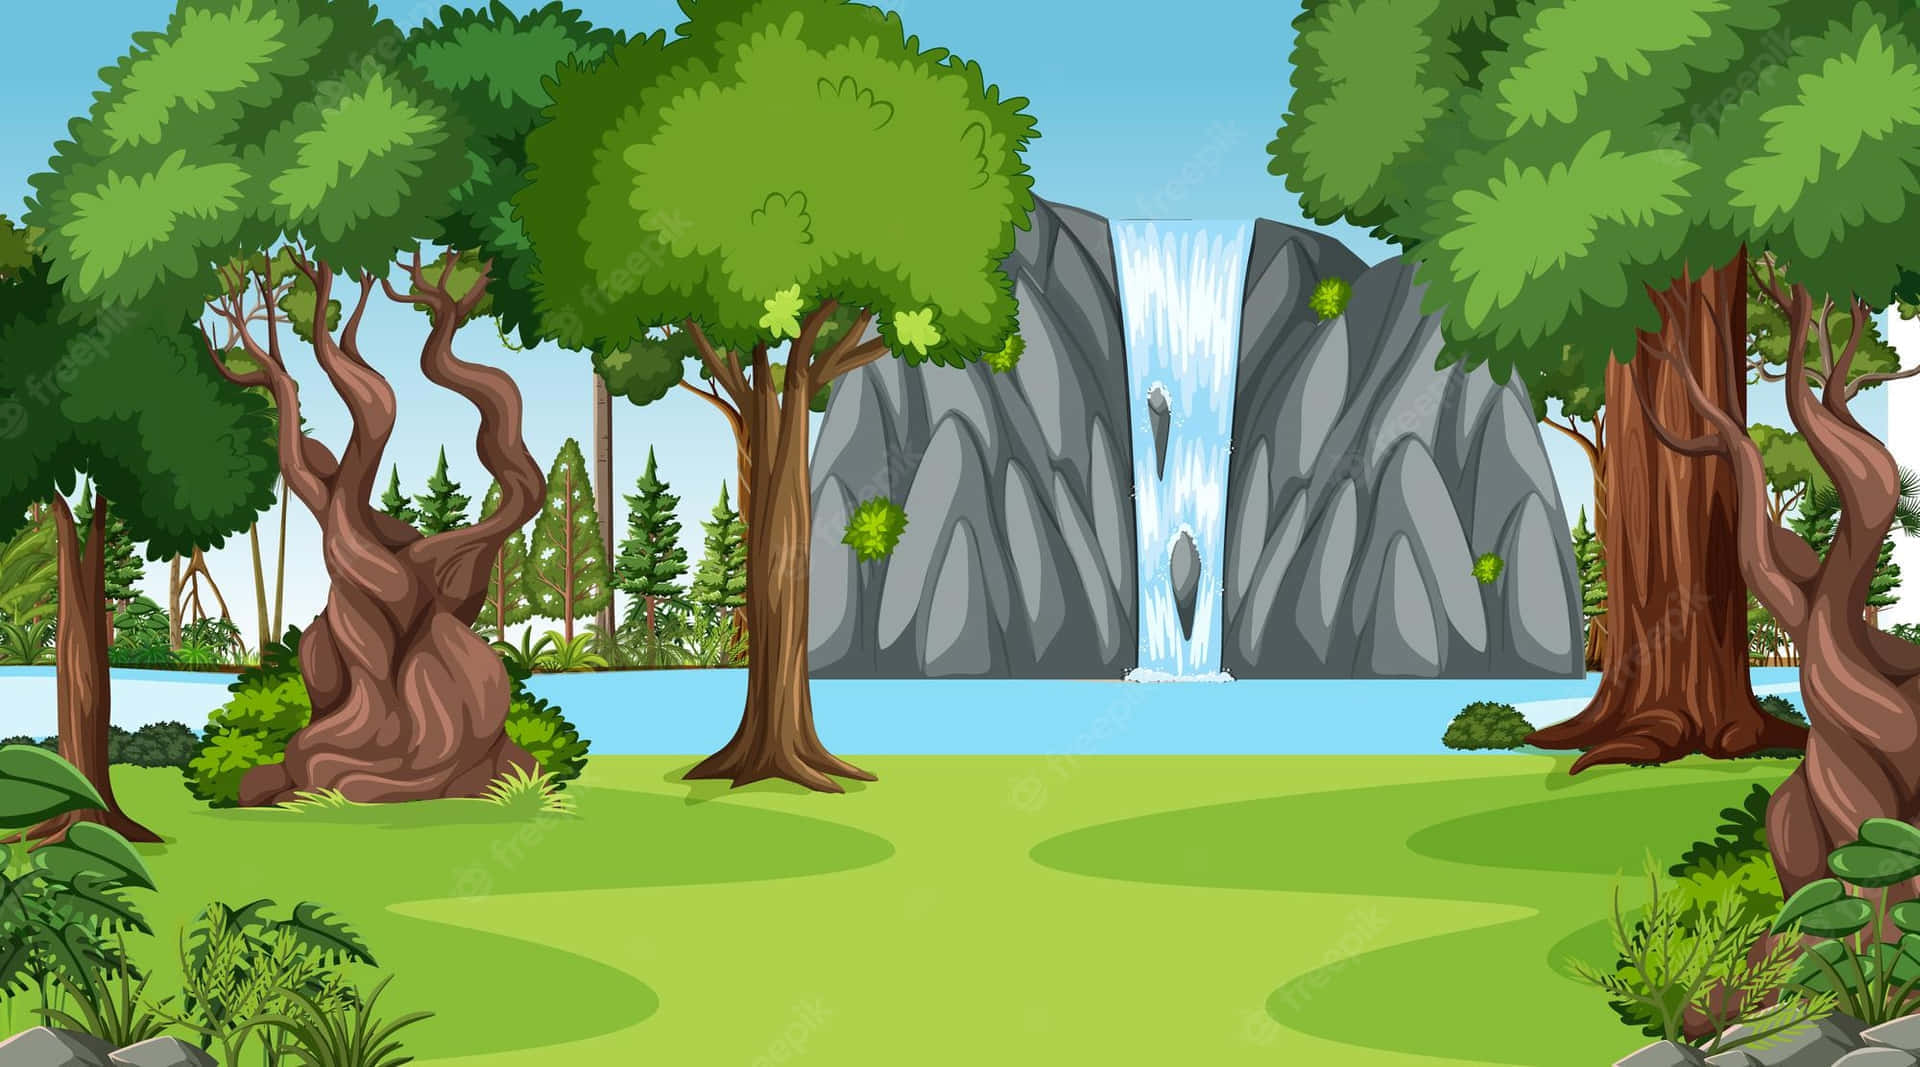 A Serene Walk Through The Animated Forest